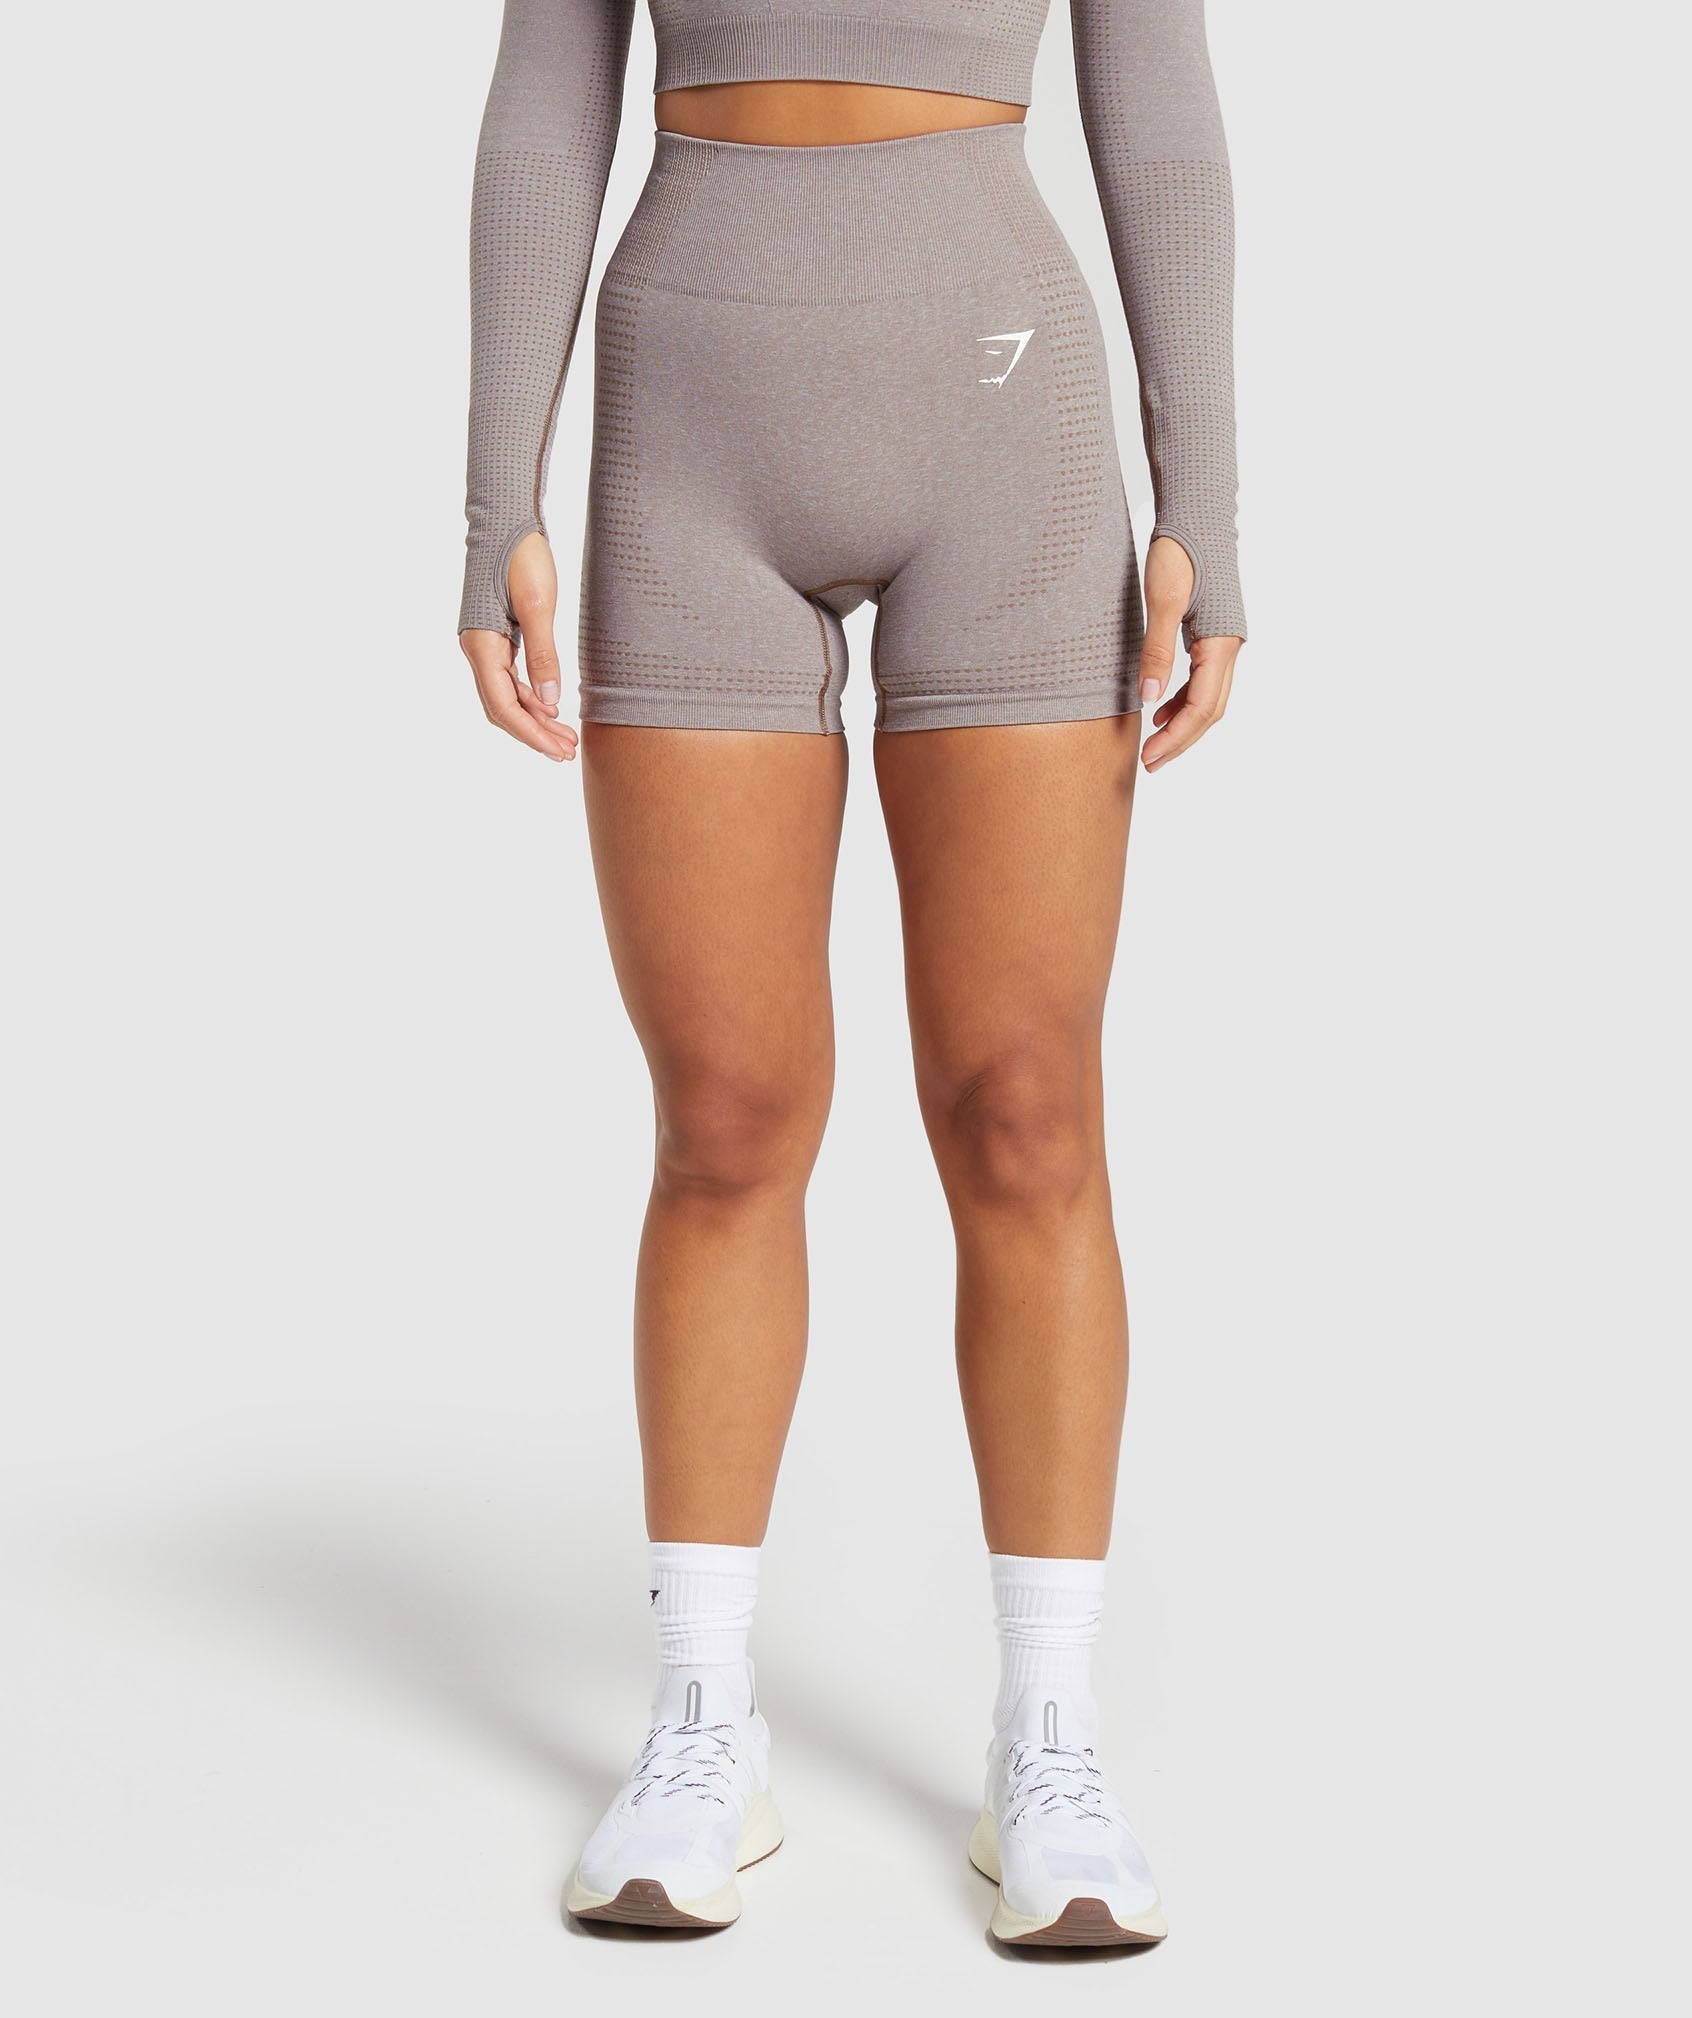 Vital Seamless 2.0 Shorts in Warm Taupe Marl is out of stock